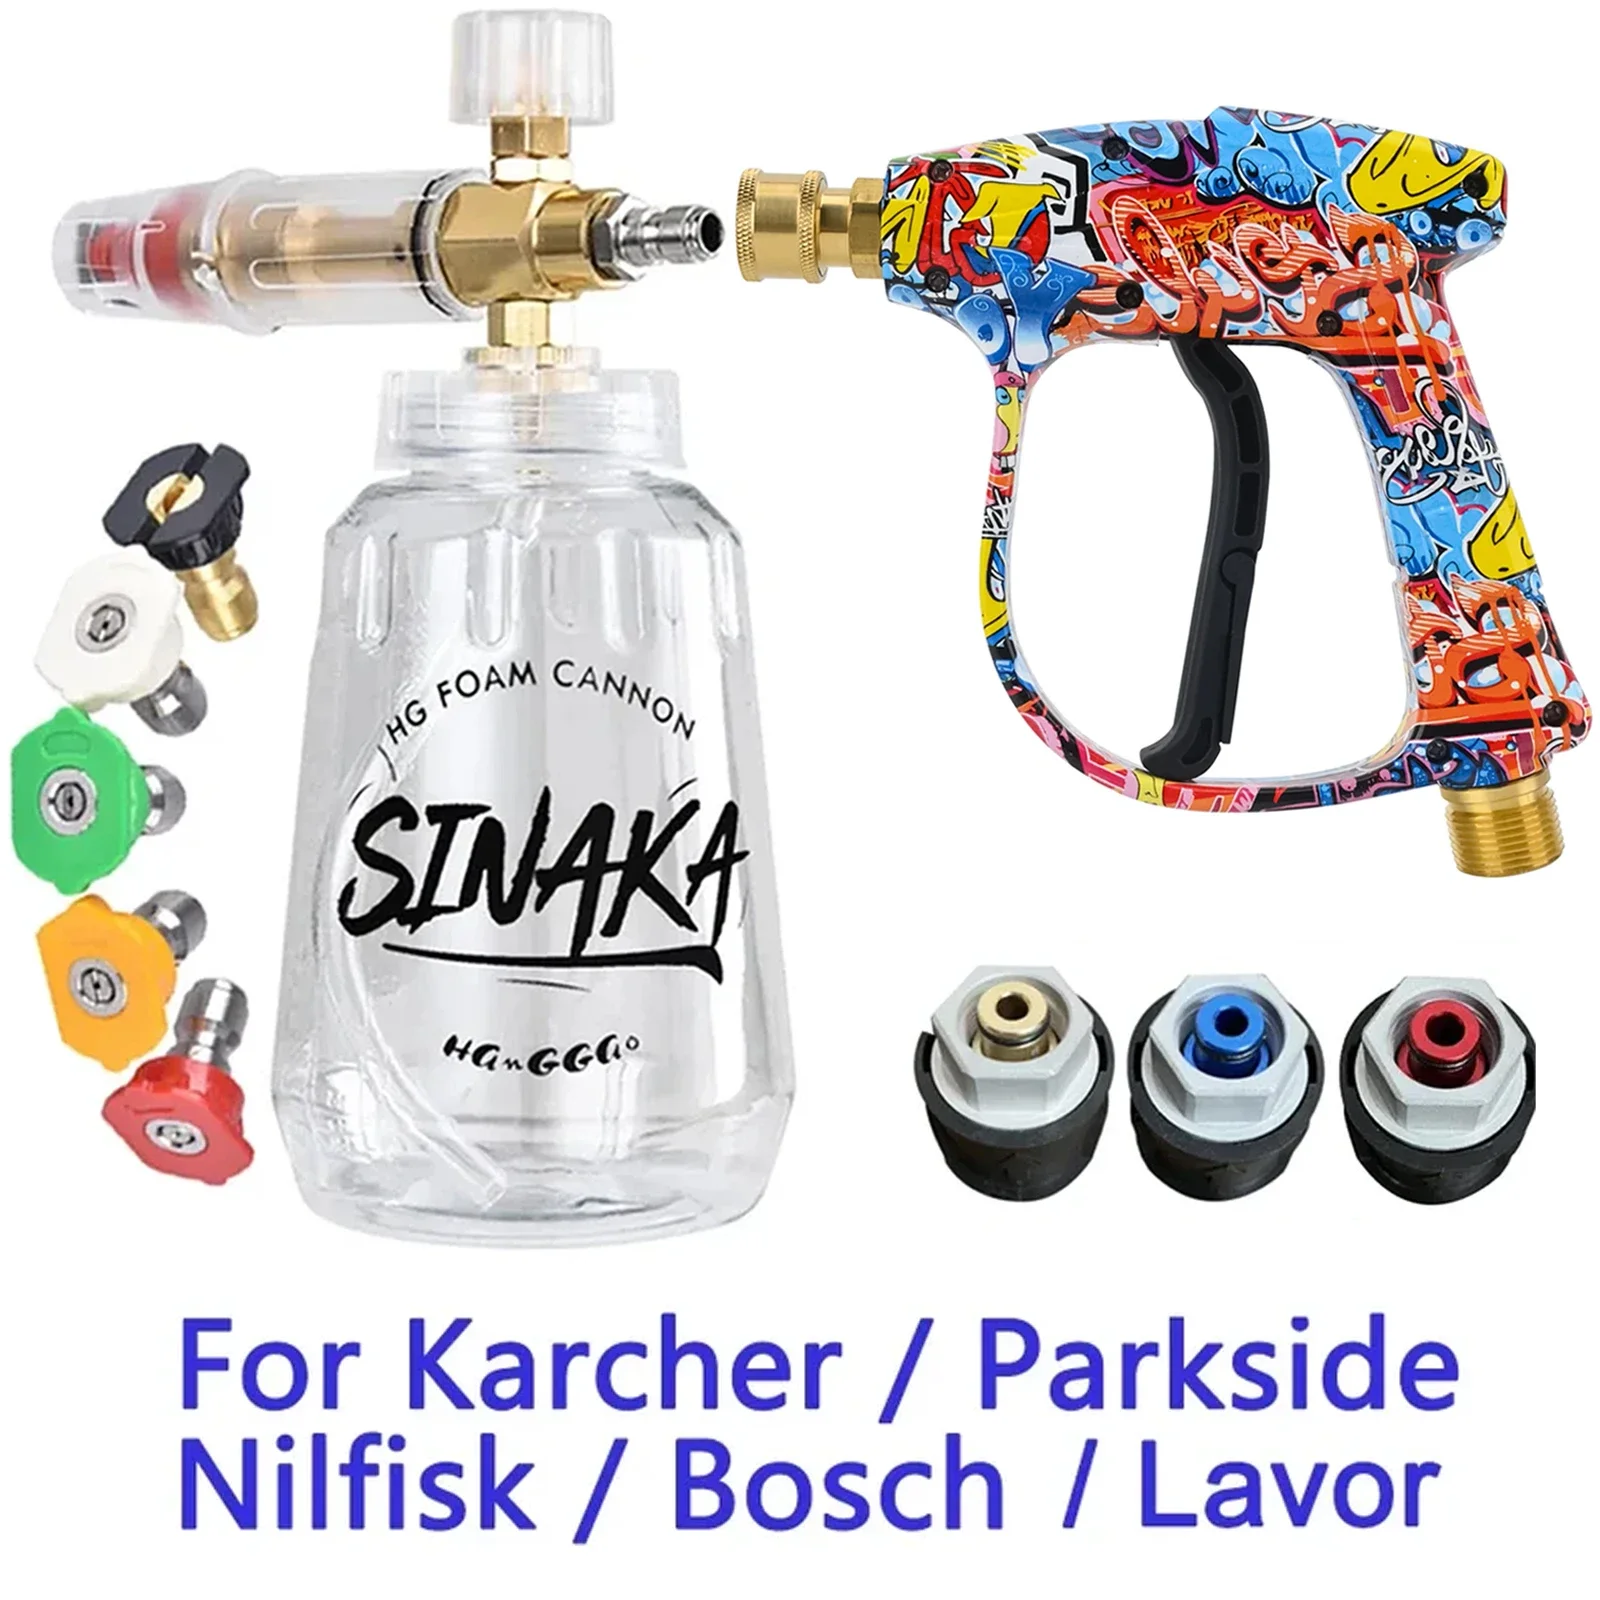 

High Pressure Washer Water Gun for Car Cleaning Hose Connector for Karcher Nilfisk Parkside Bosch Lavor Quick Connector Nozzles